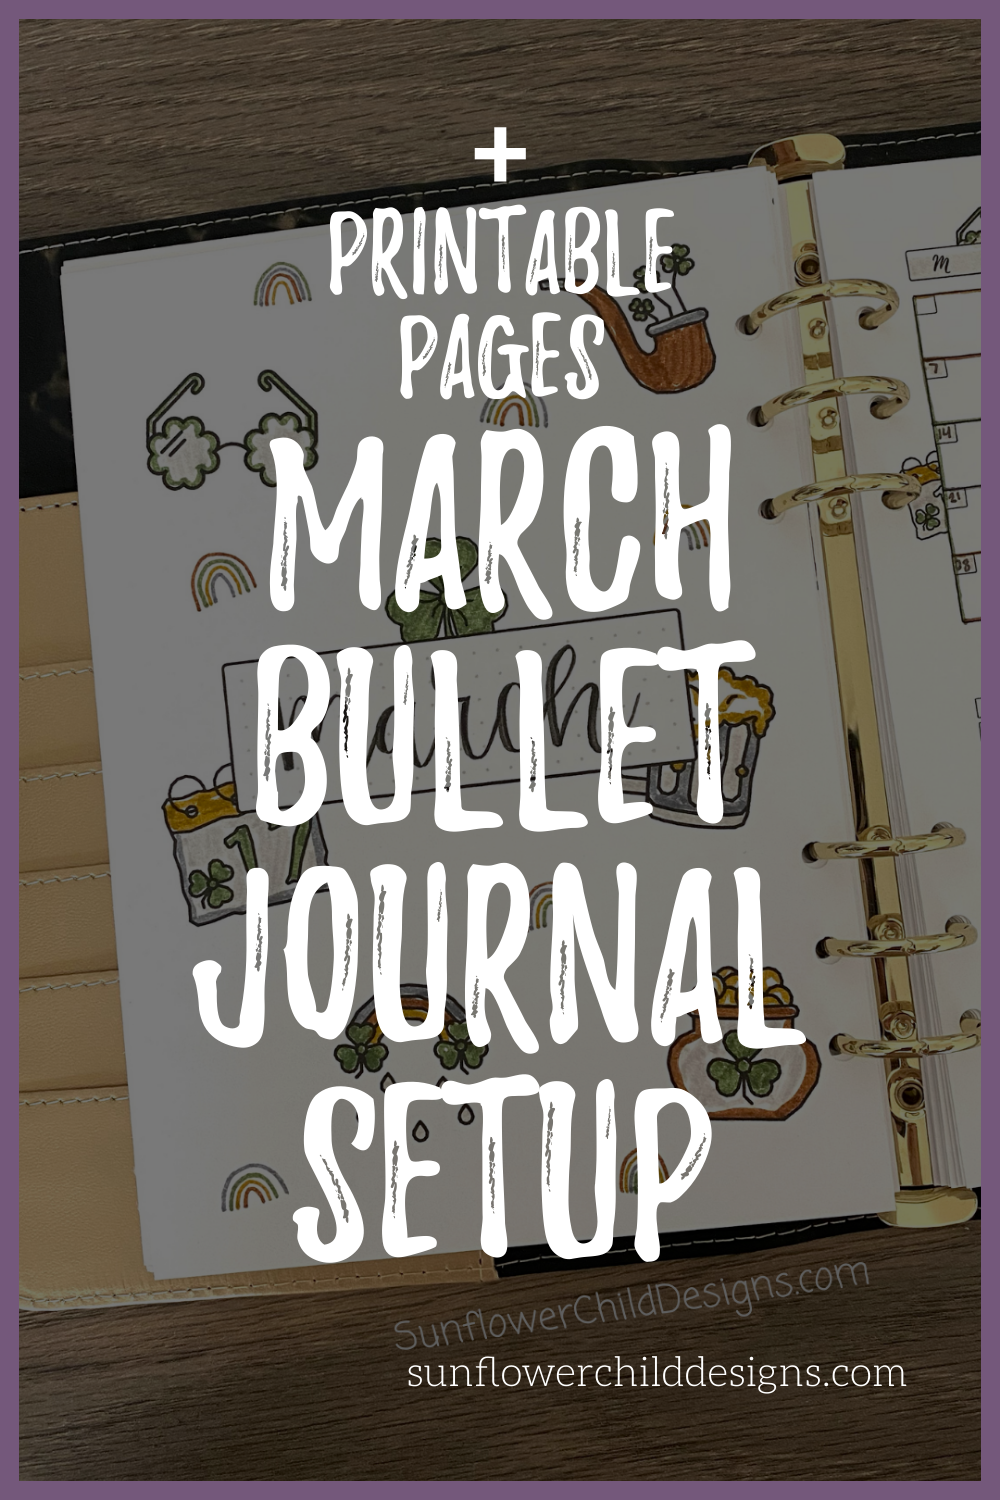  Bullet Journal and Planner 2022: A Premade Dotted